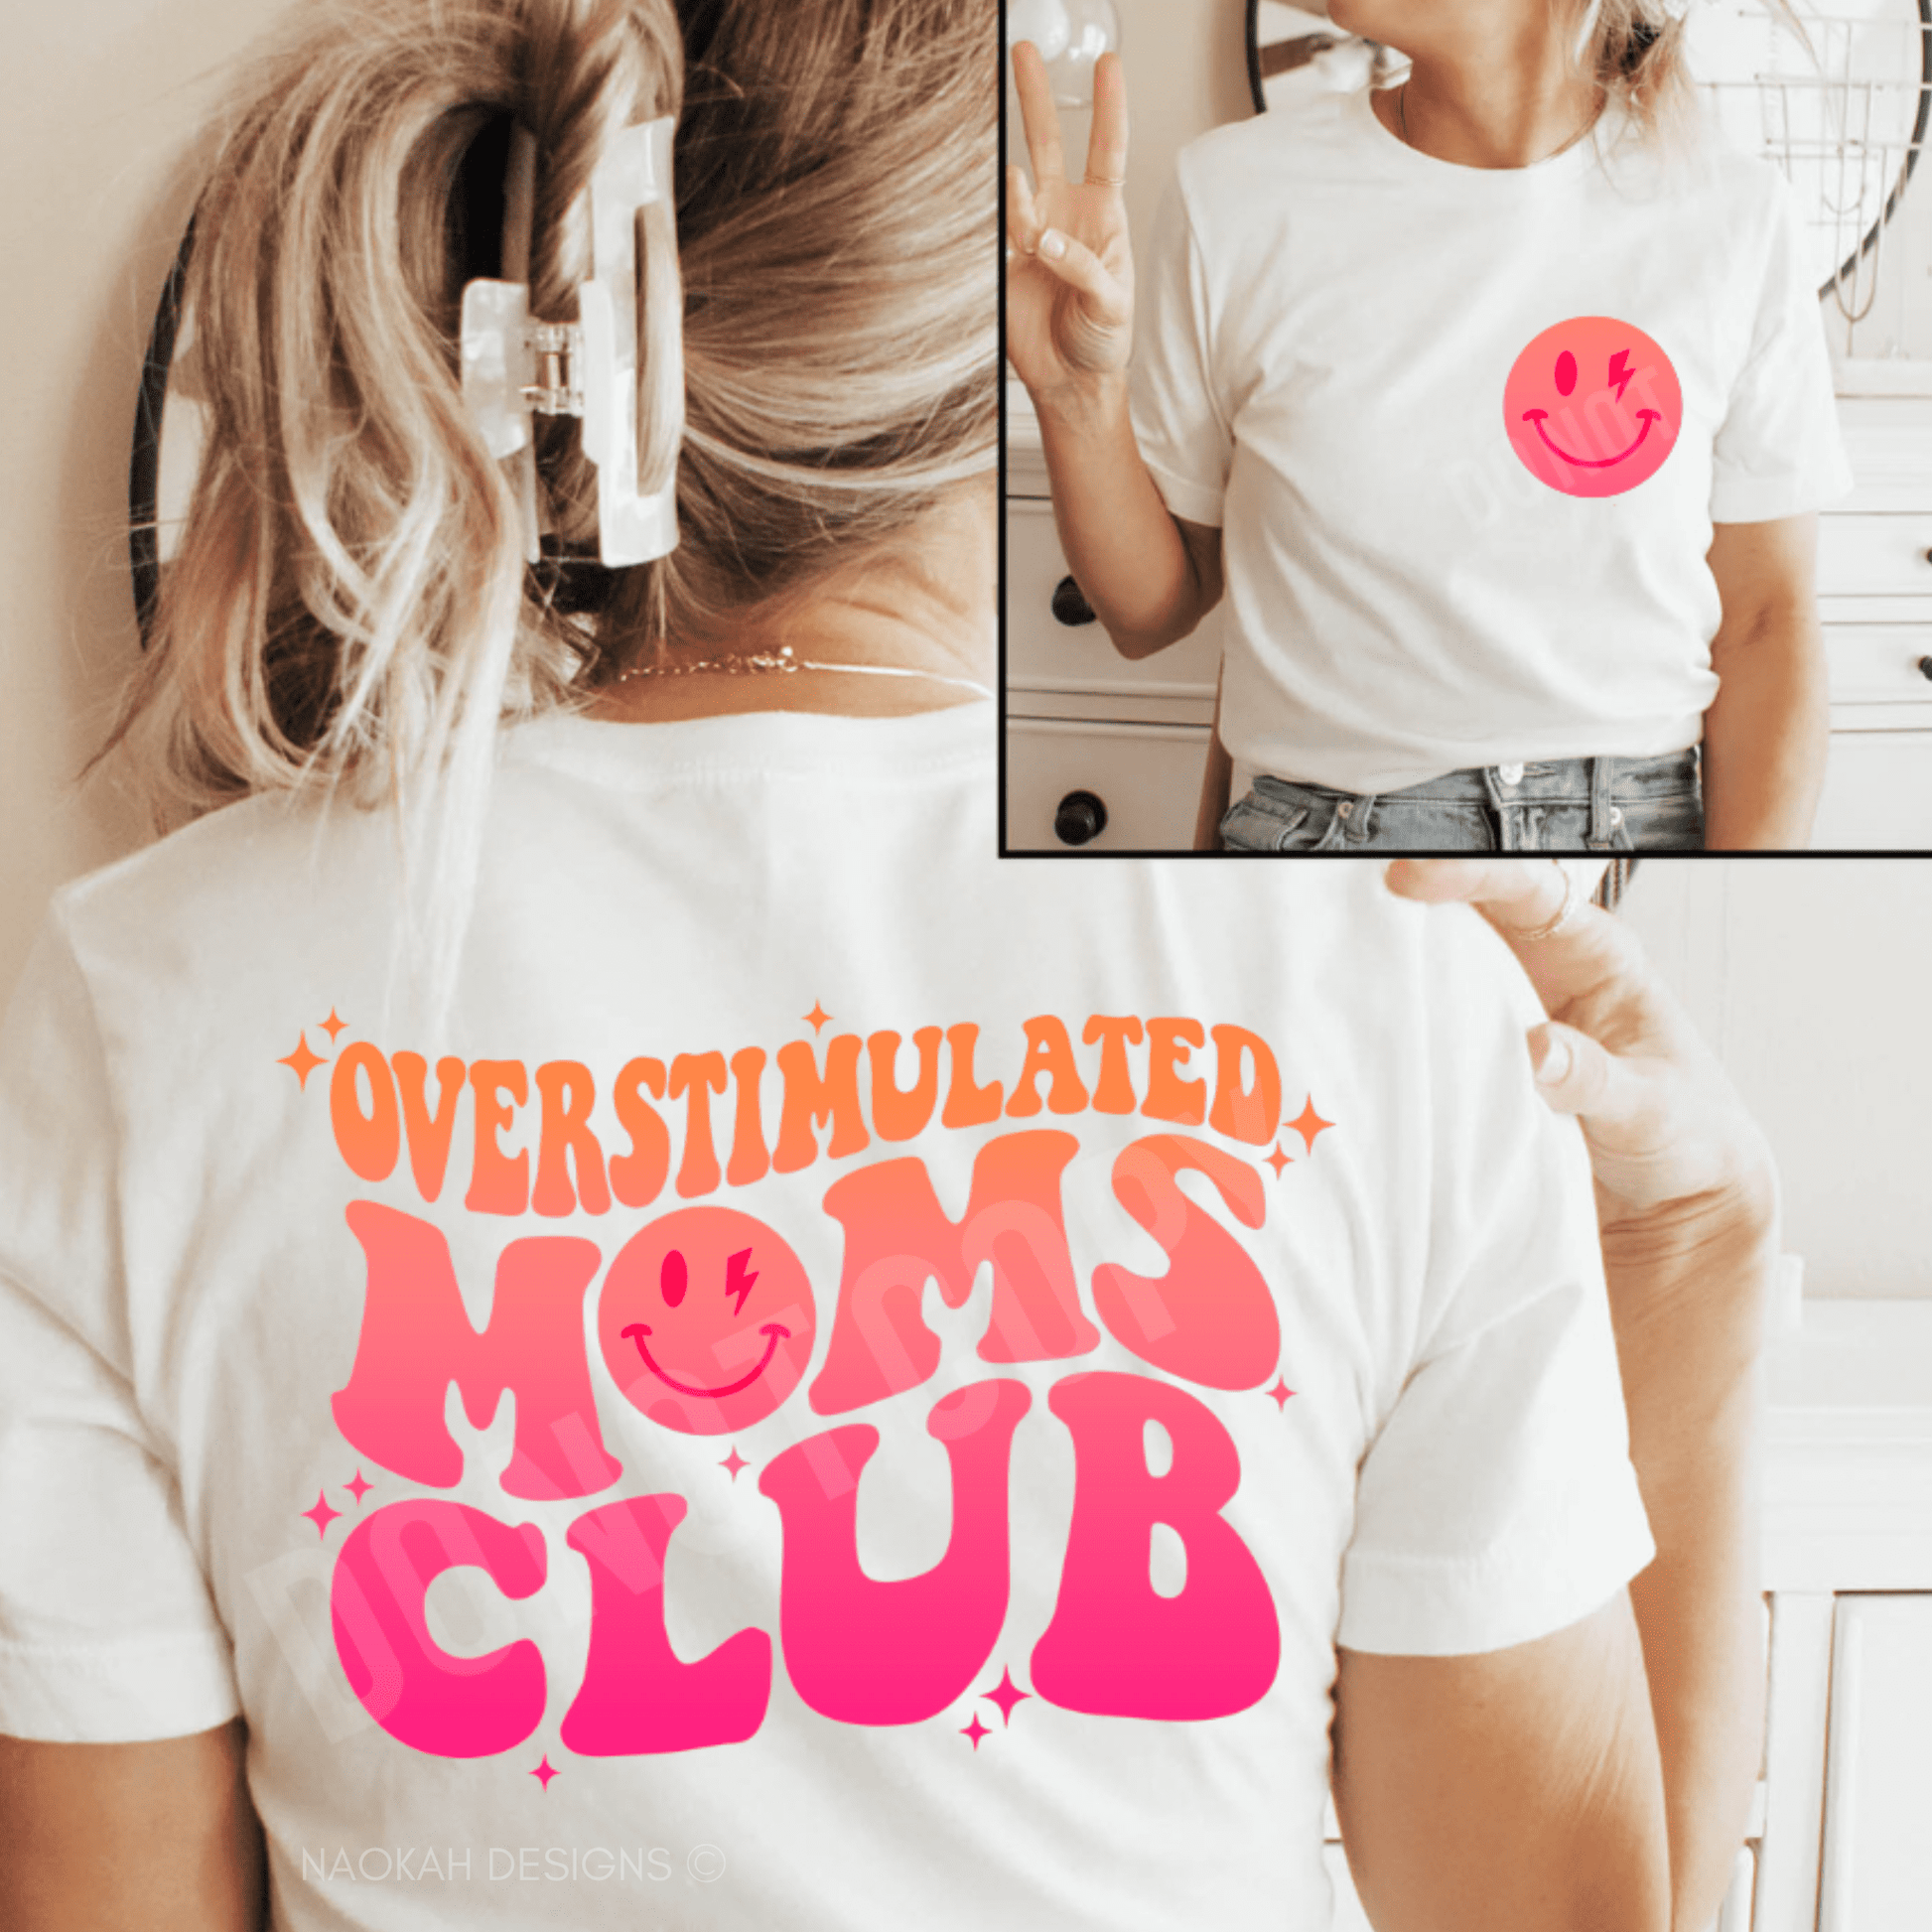 Overstimulated Moms Club Shirt, Anxiety Moms Shirt, Trendy Mom Shirt, Retro Mom Shirt, New Mom Shirt, Cute Moms Shirt, Mothers Day Gift, bad moms club shirt, bad aunts club shirt, good moms say bad words shirt, mom anxiety shirt, cool moms club shirt, tired moms club shirt, mental health shirt, trendy mom shirt 